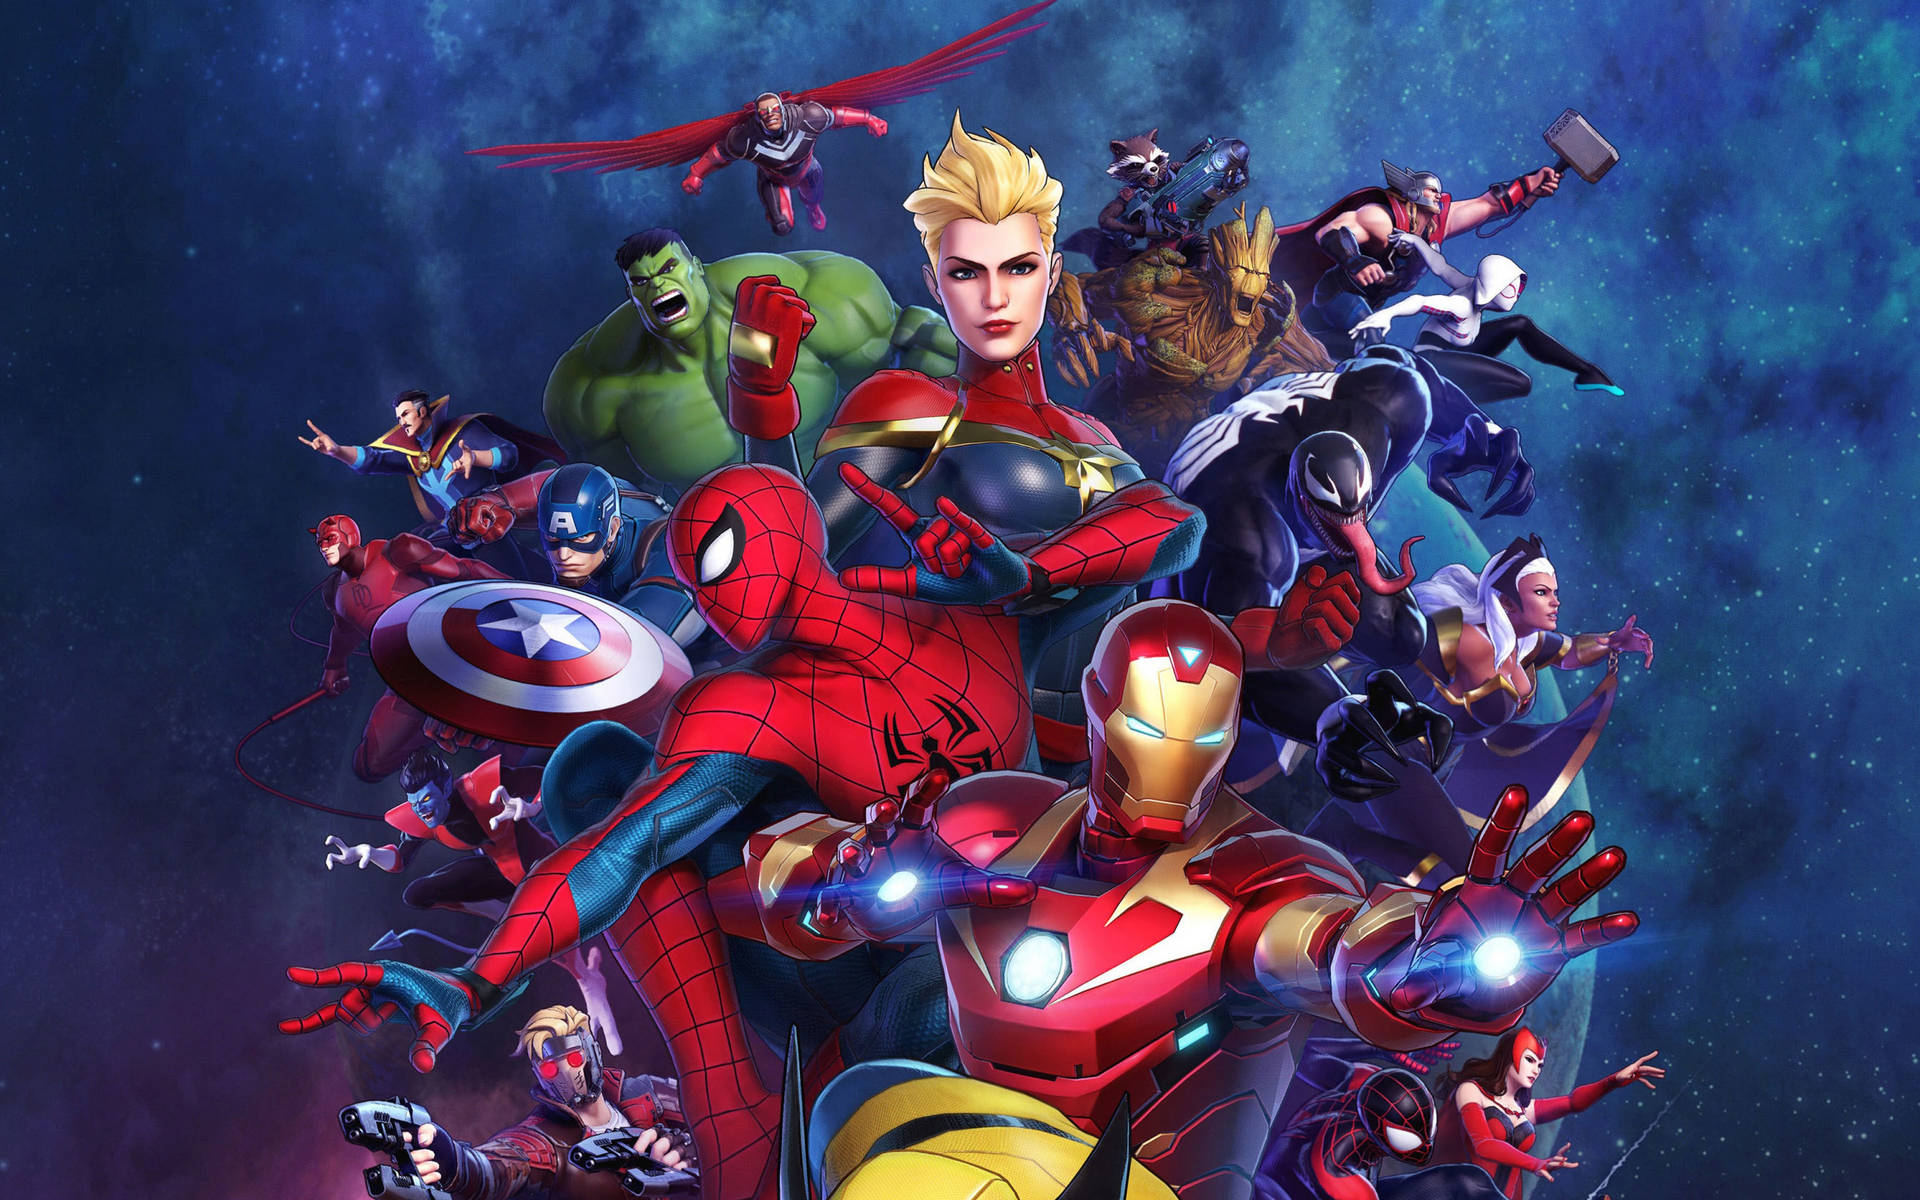 Marvel Superheroes In The Galaxy